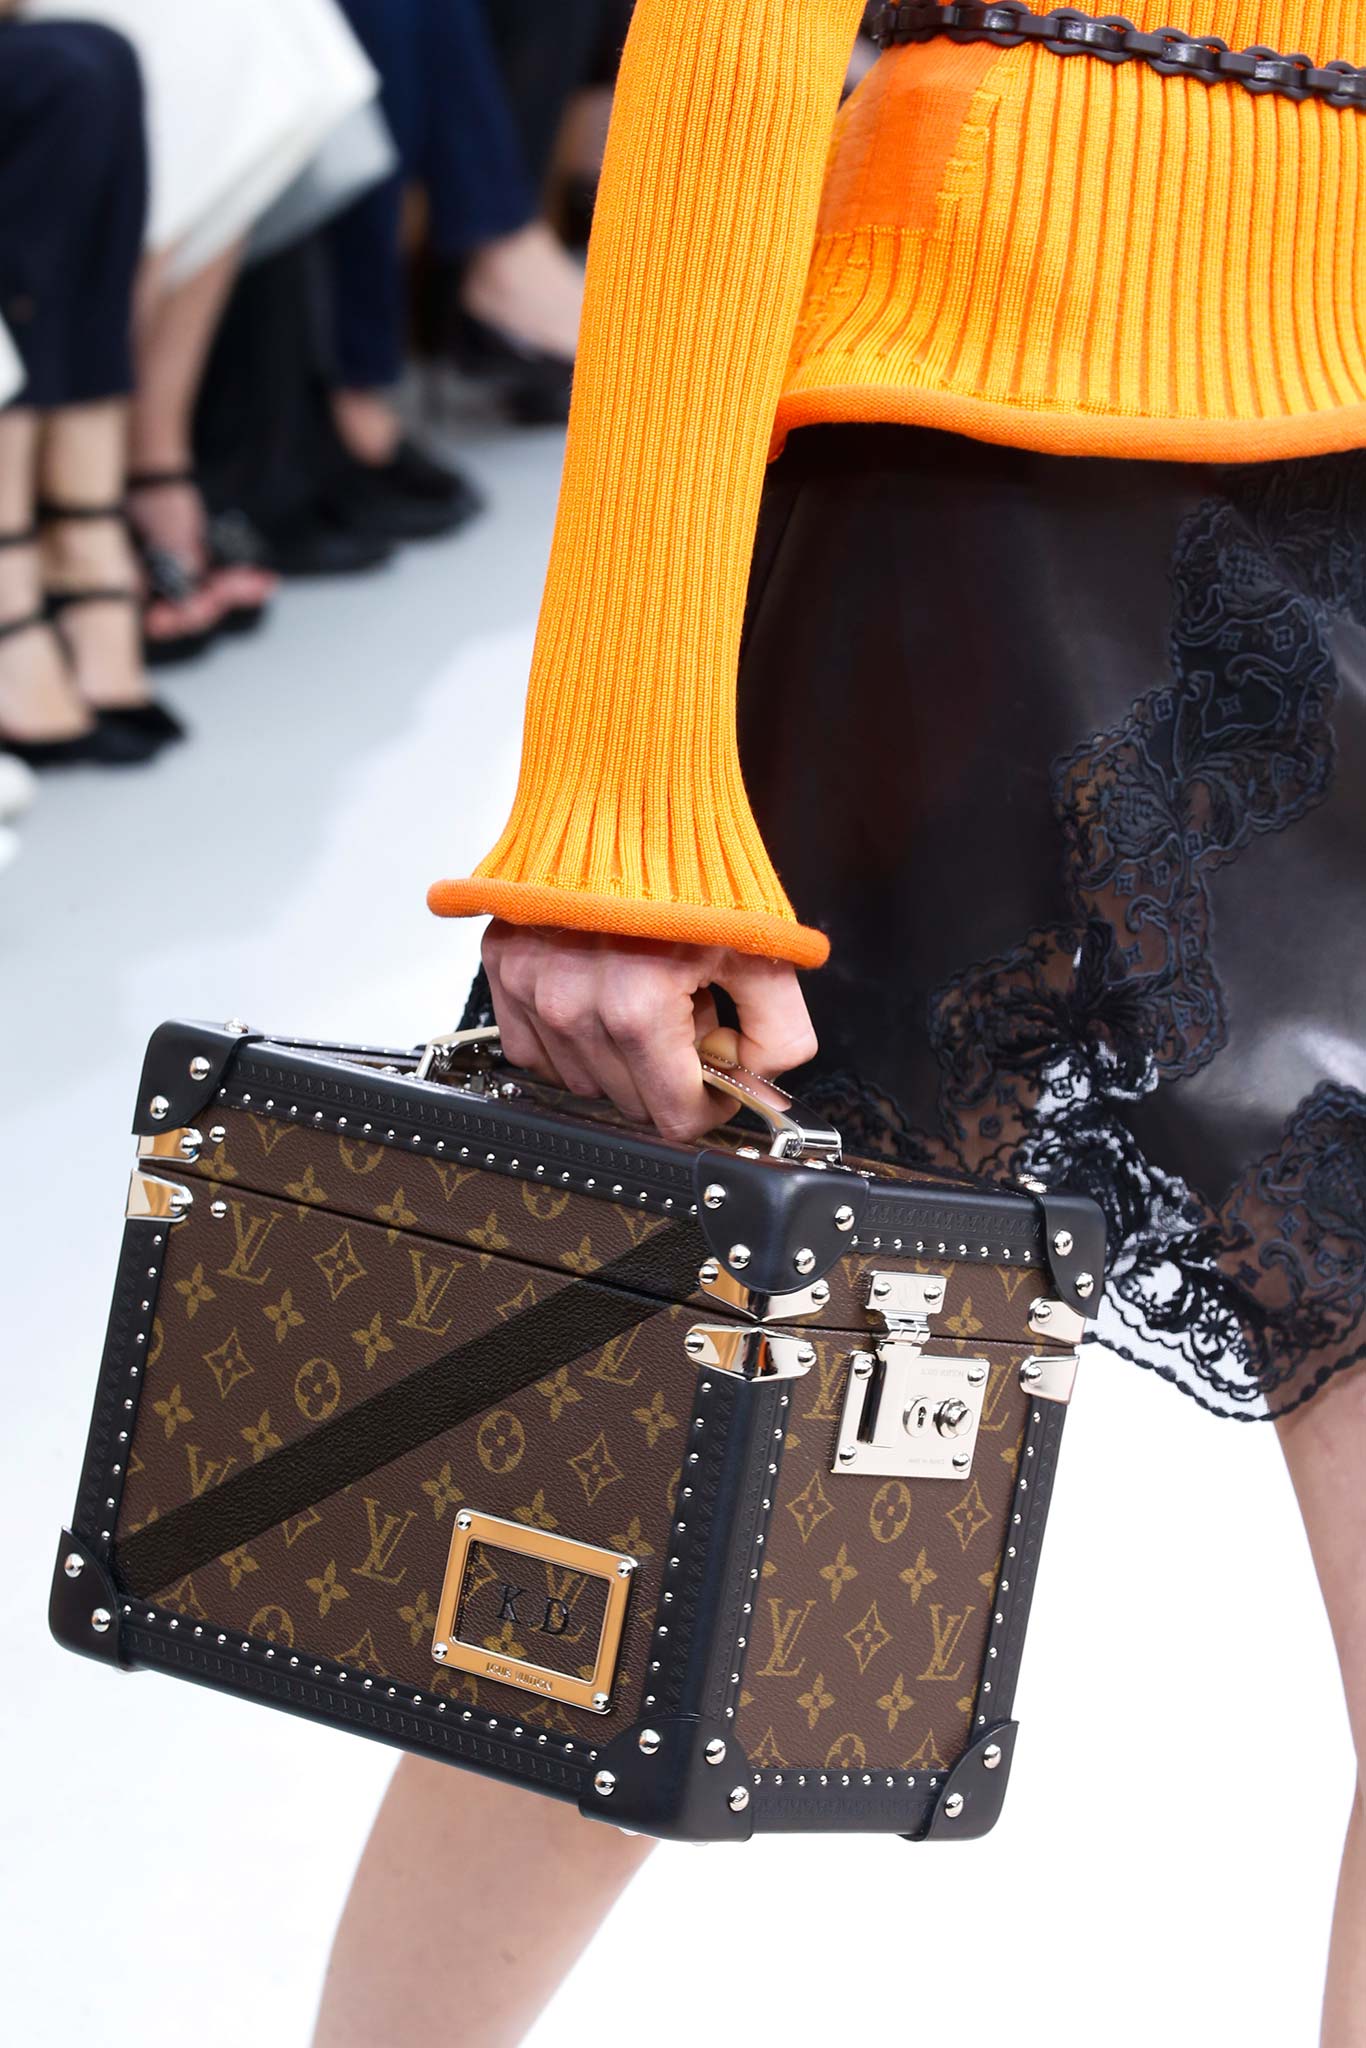 LOUIS VUITTON- History and Timeline, by Kajal Makhija